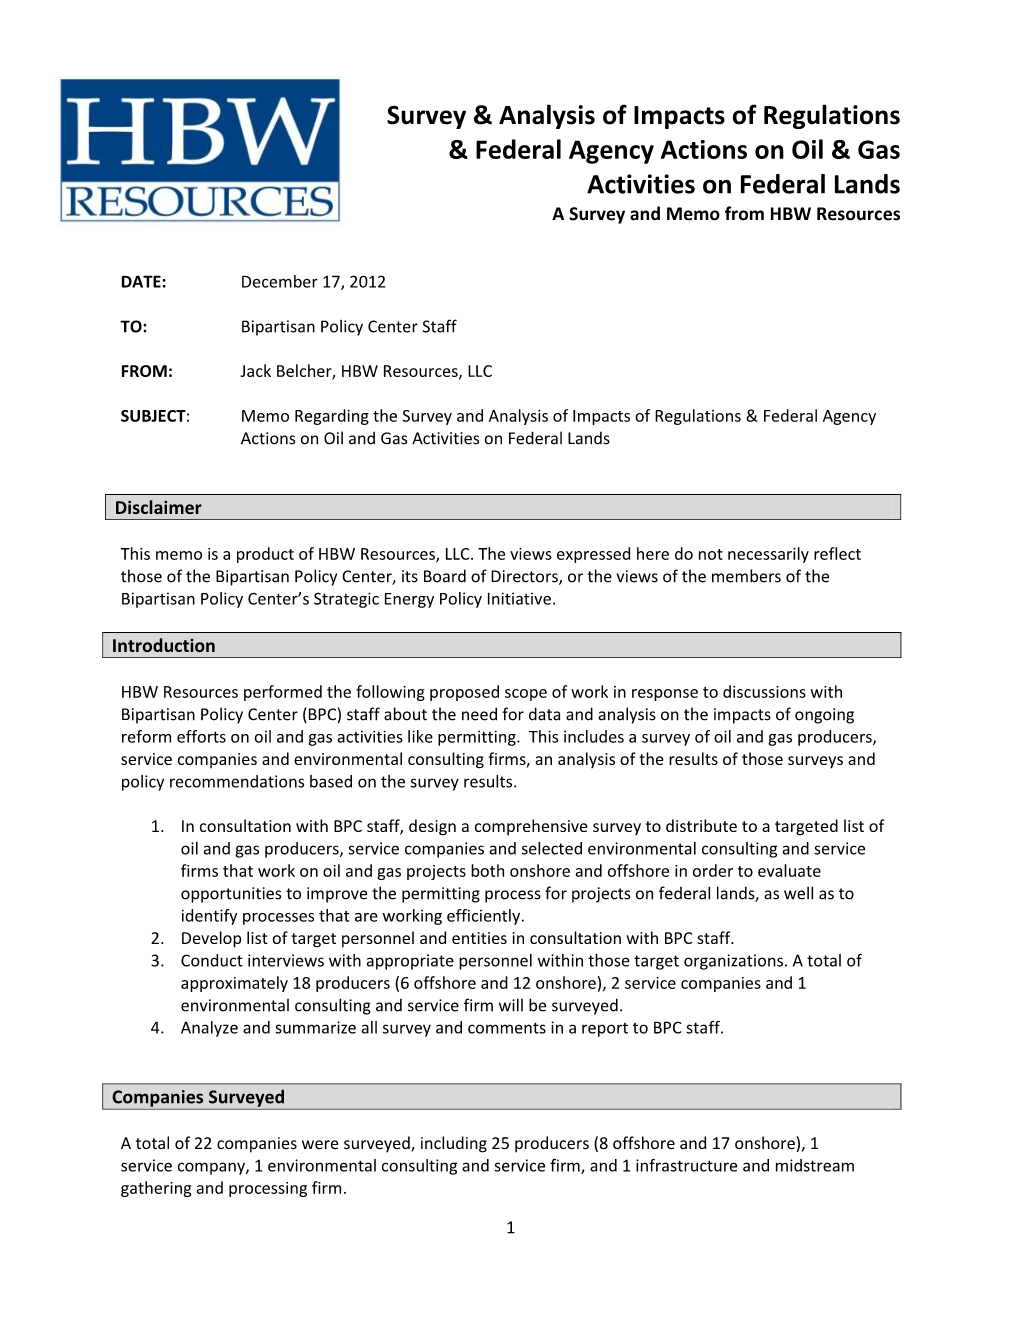 Survey & Analysis of Impacts of Regulations & Federal Agency